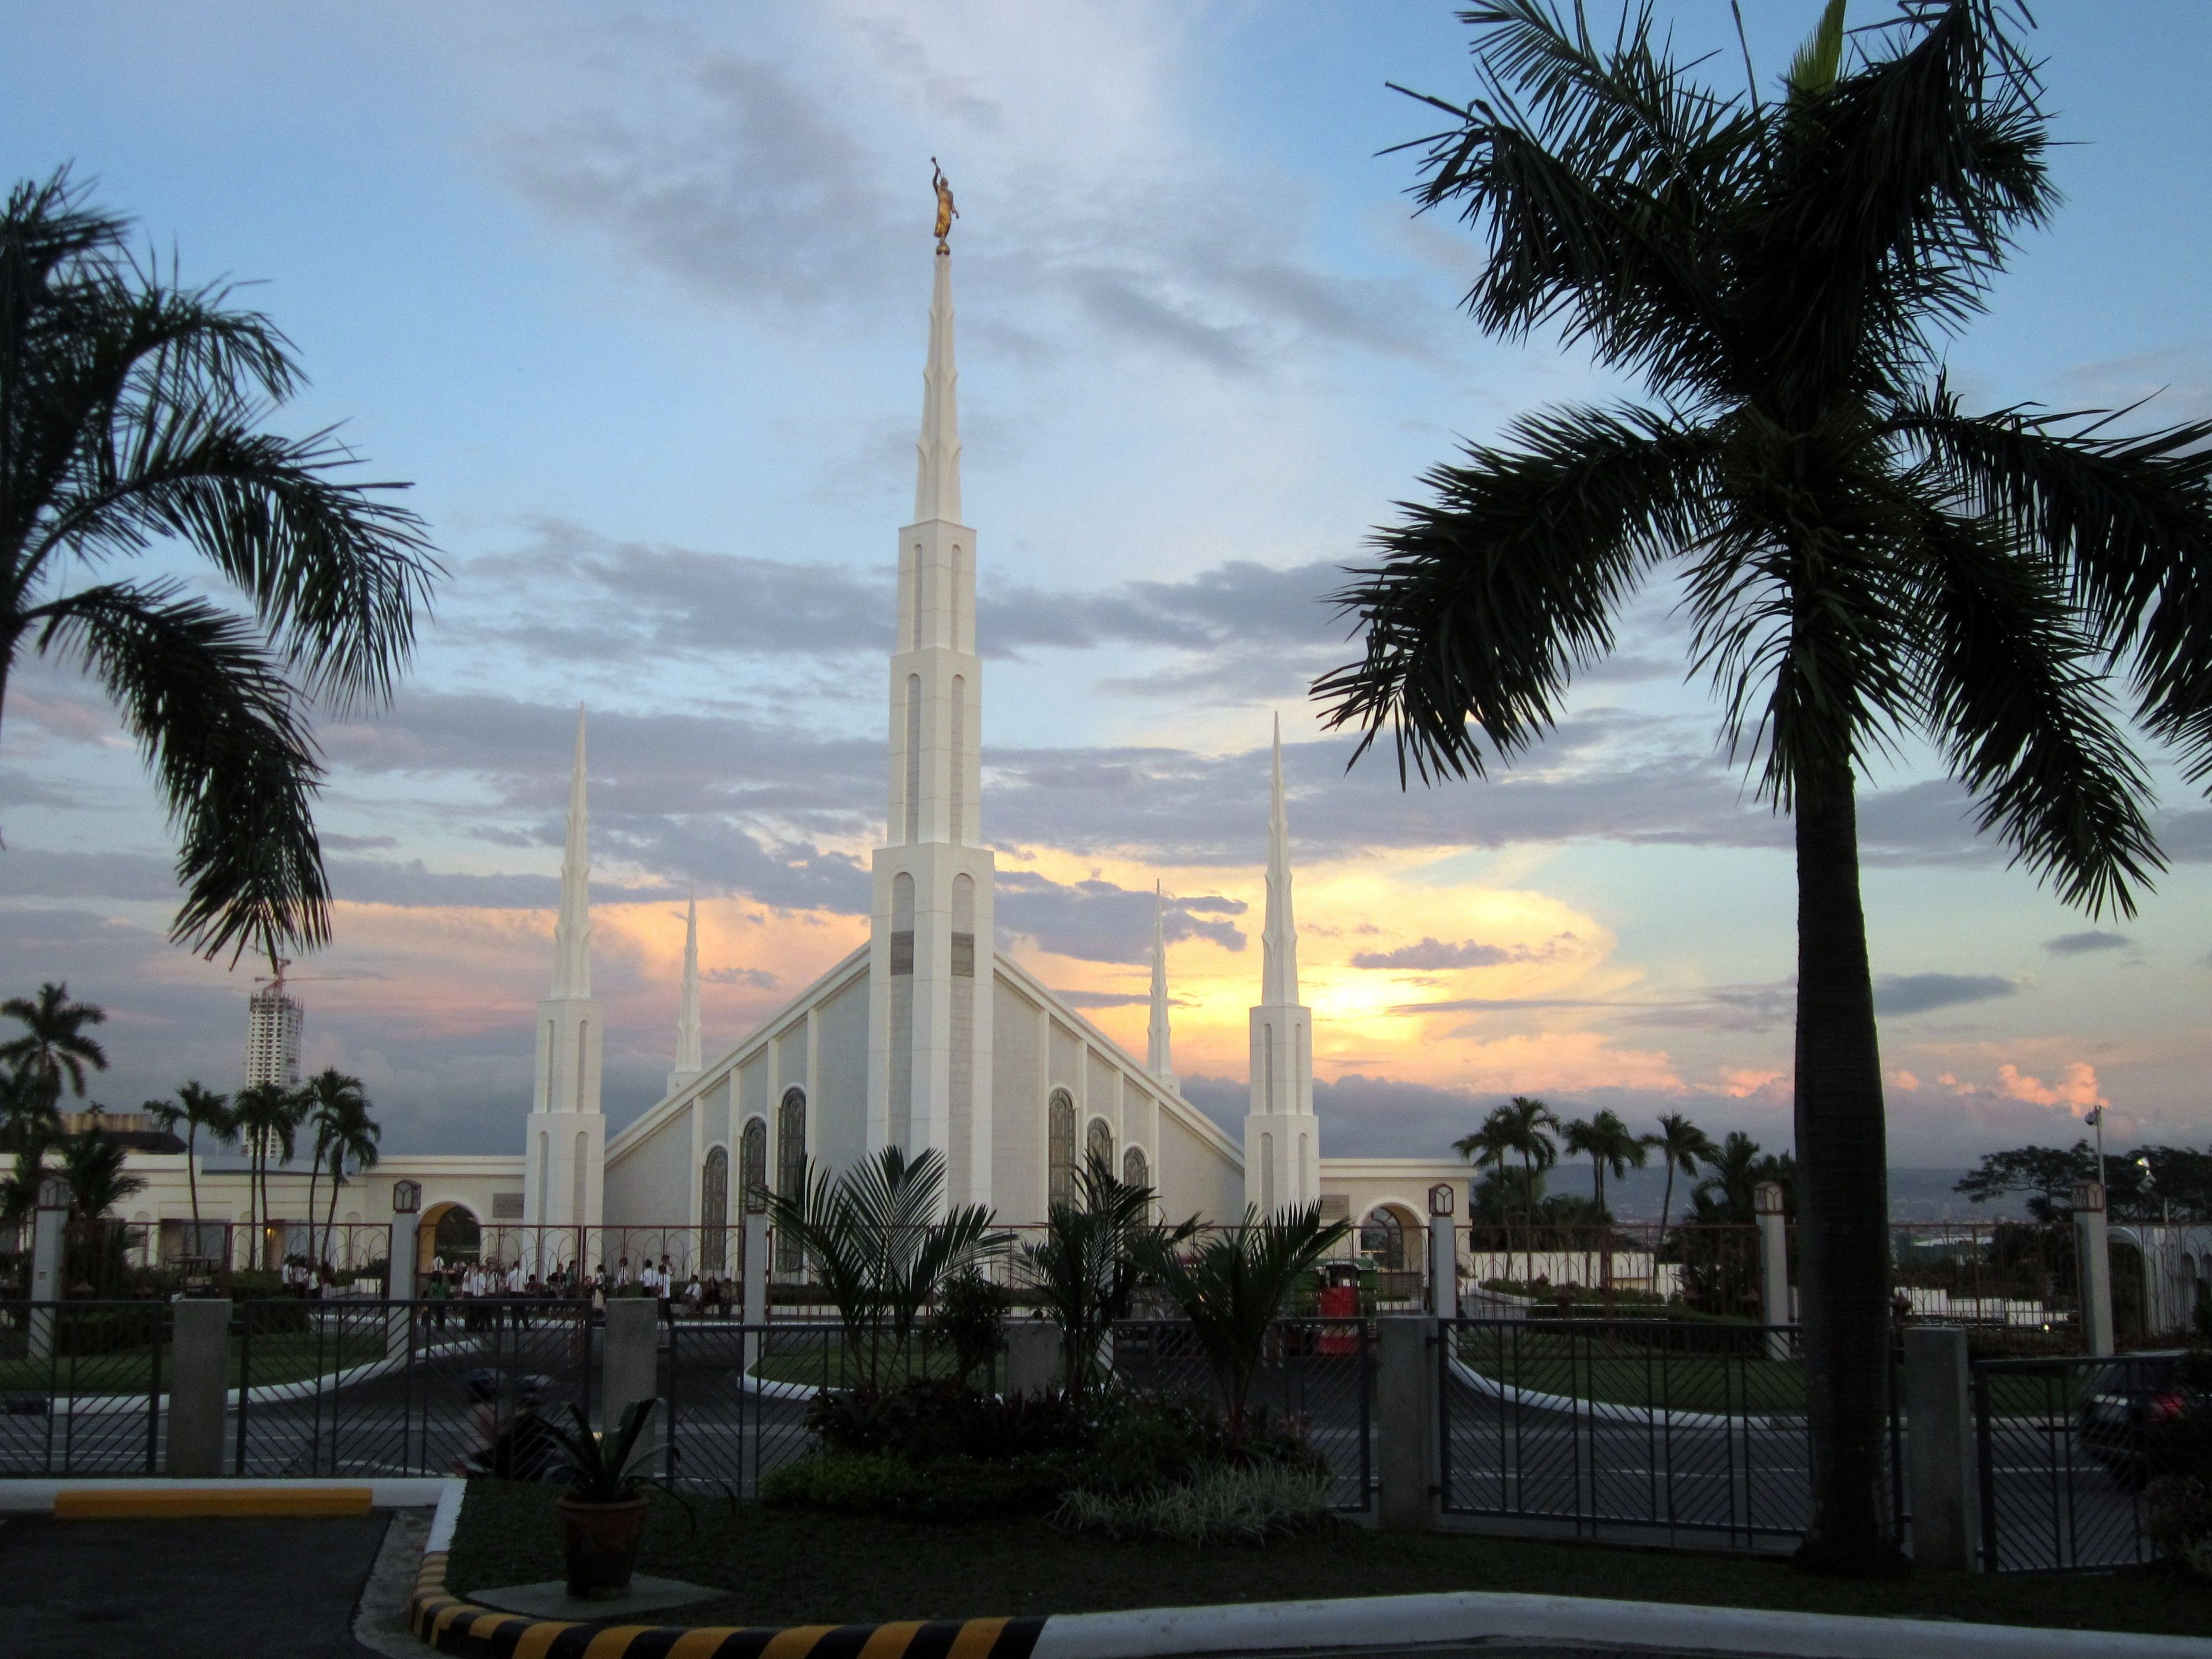 The Manila Philippines Temple, including the entrance and scenery.